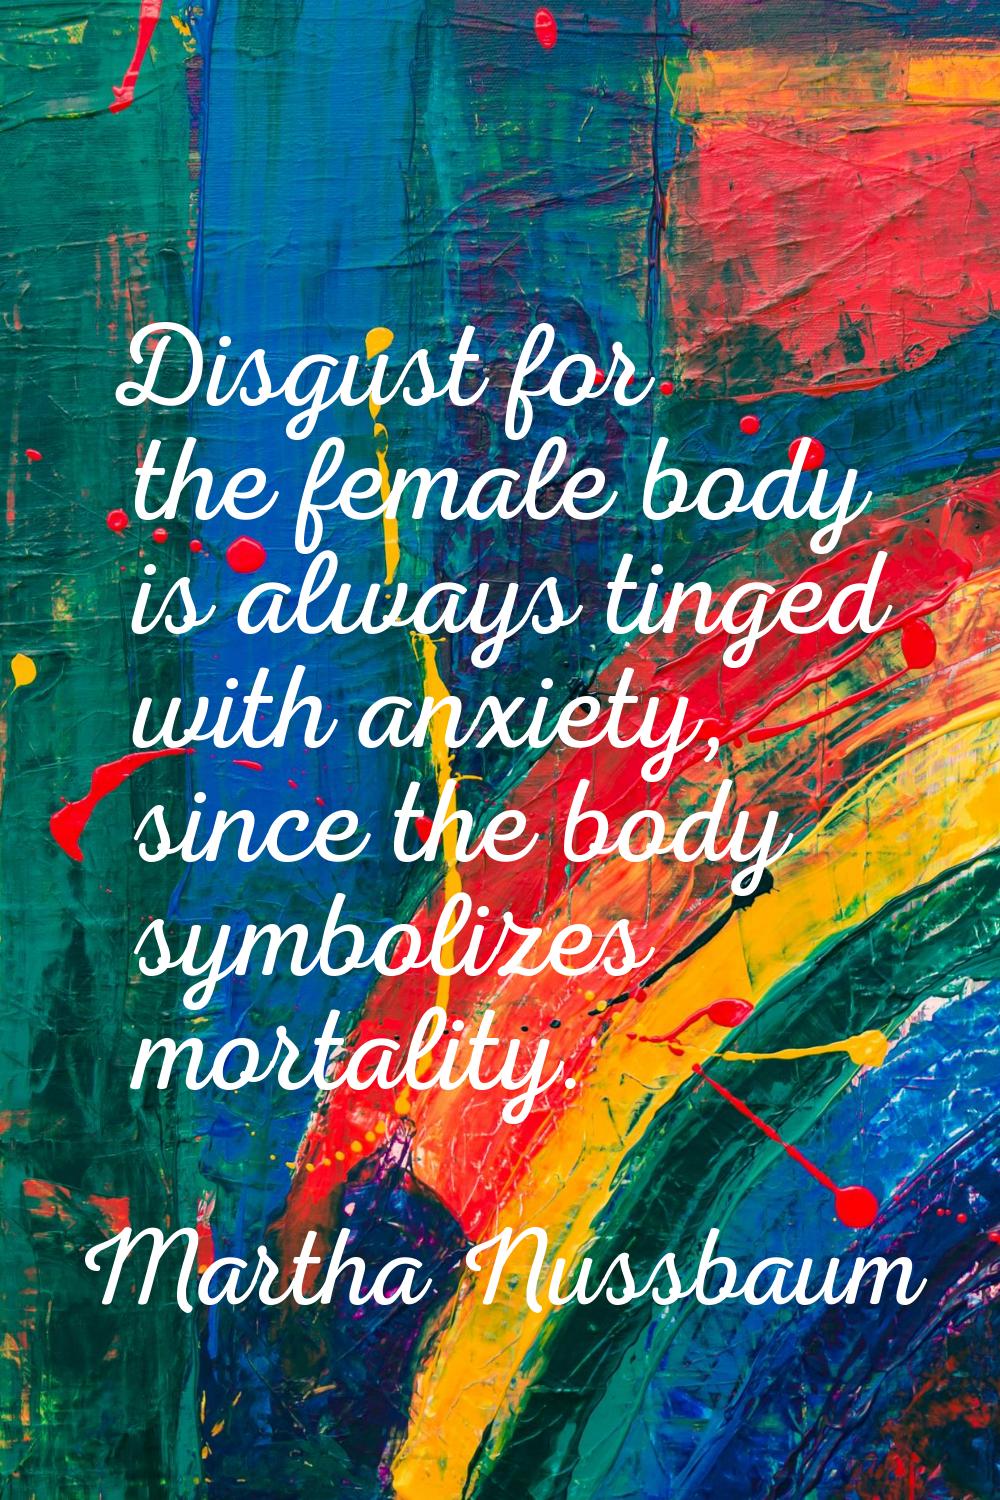 Disgust for the female body is always tinged with anxiety, since the body symbolizes mortality.